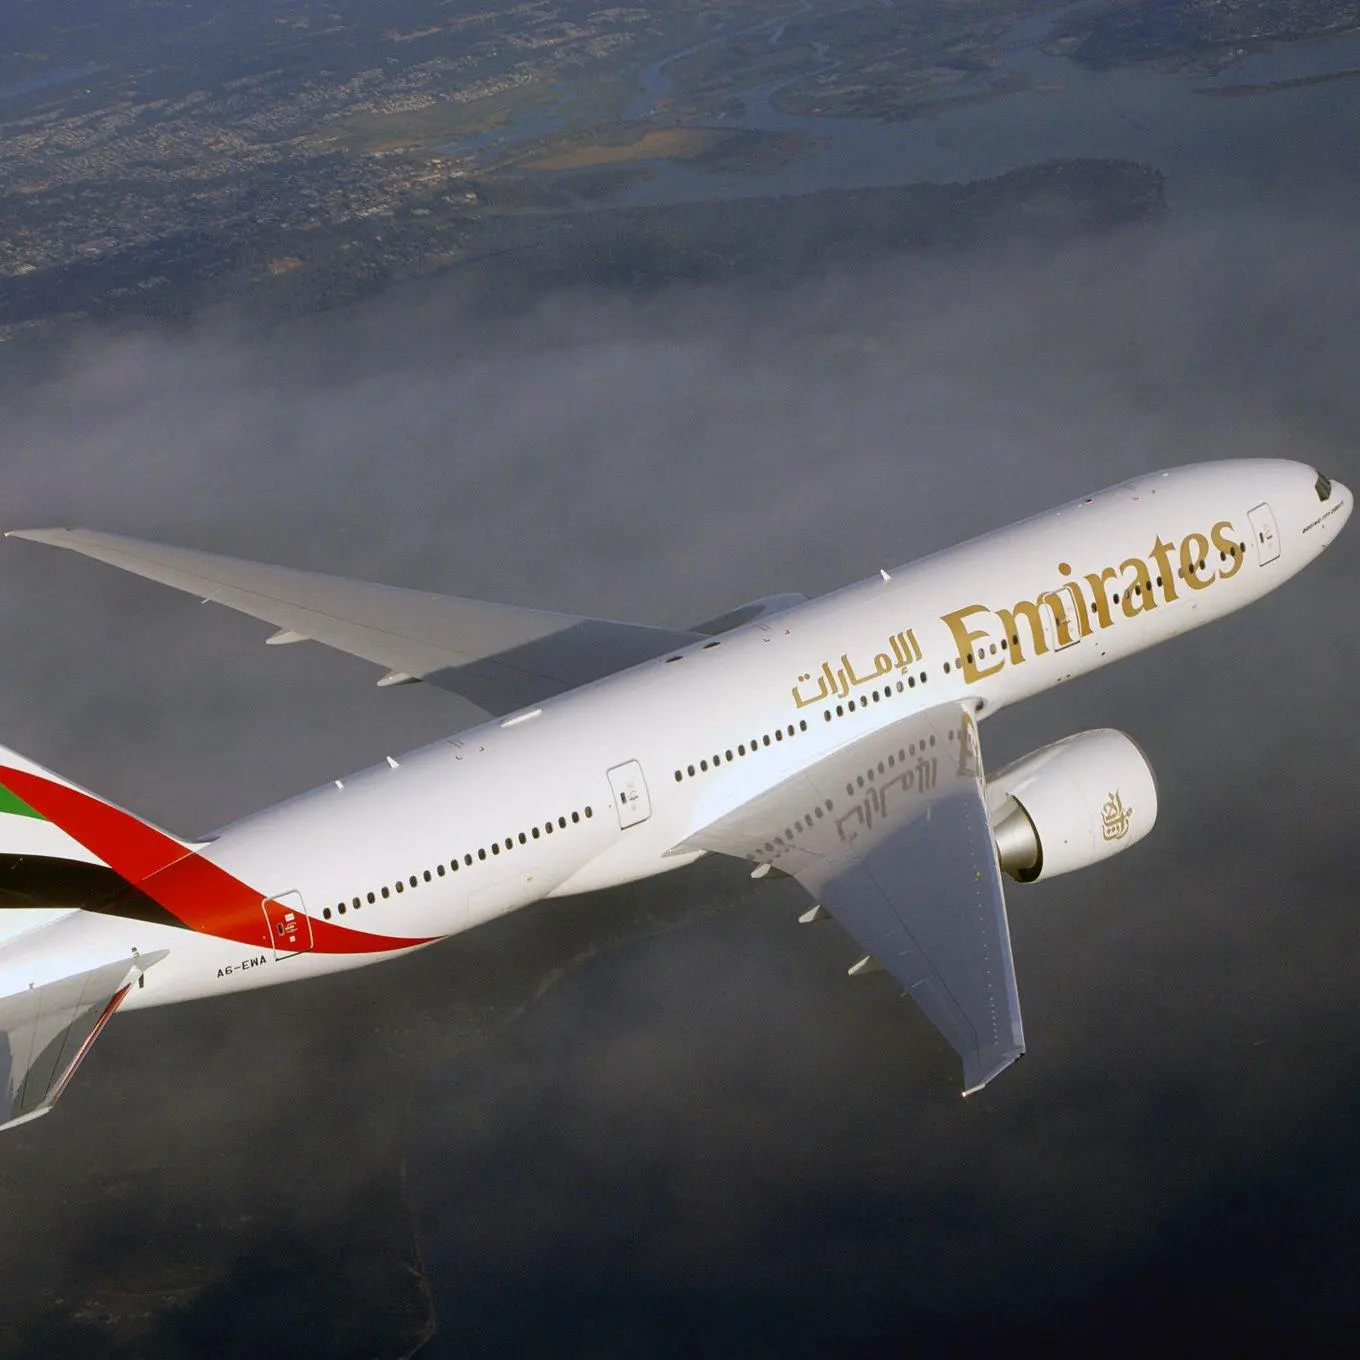 UAE flights: Emirates announces new daily service to this destination